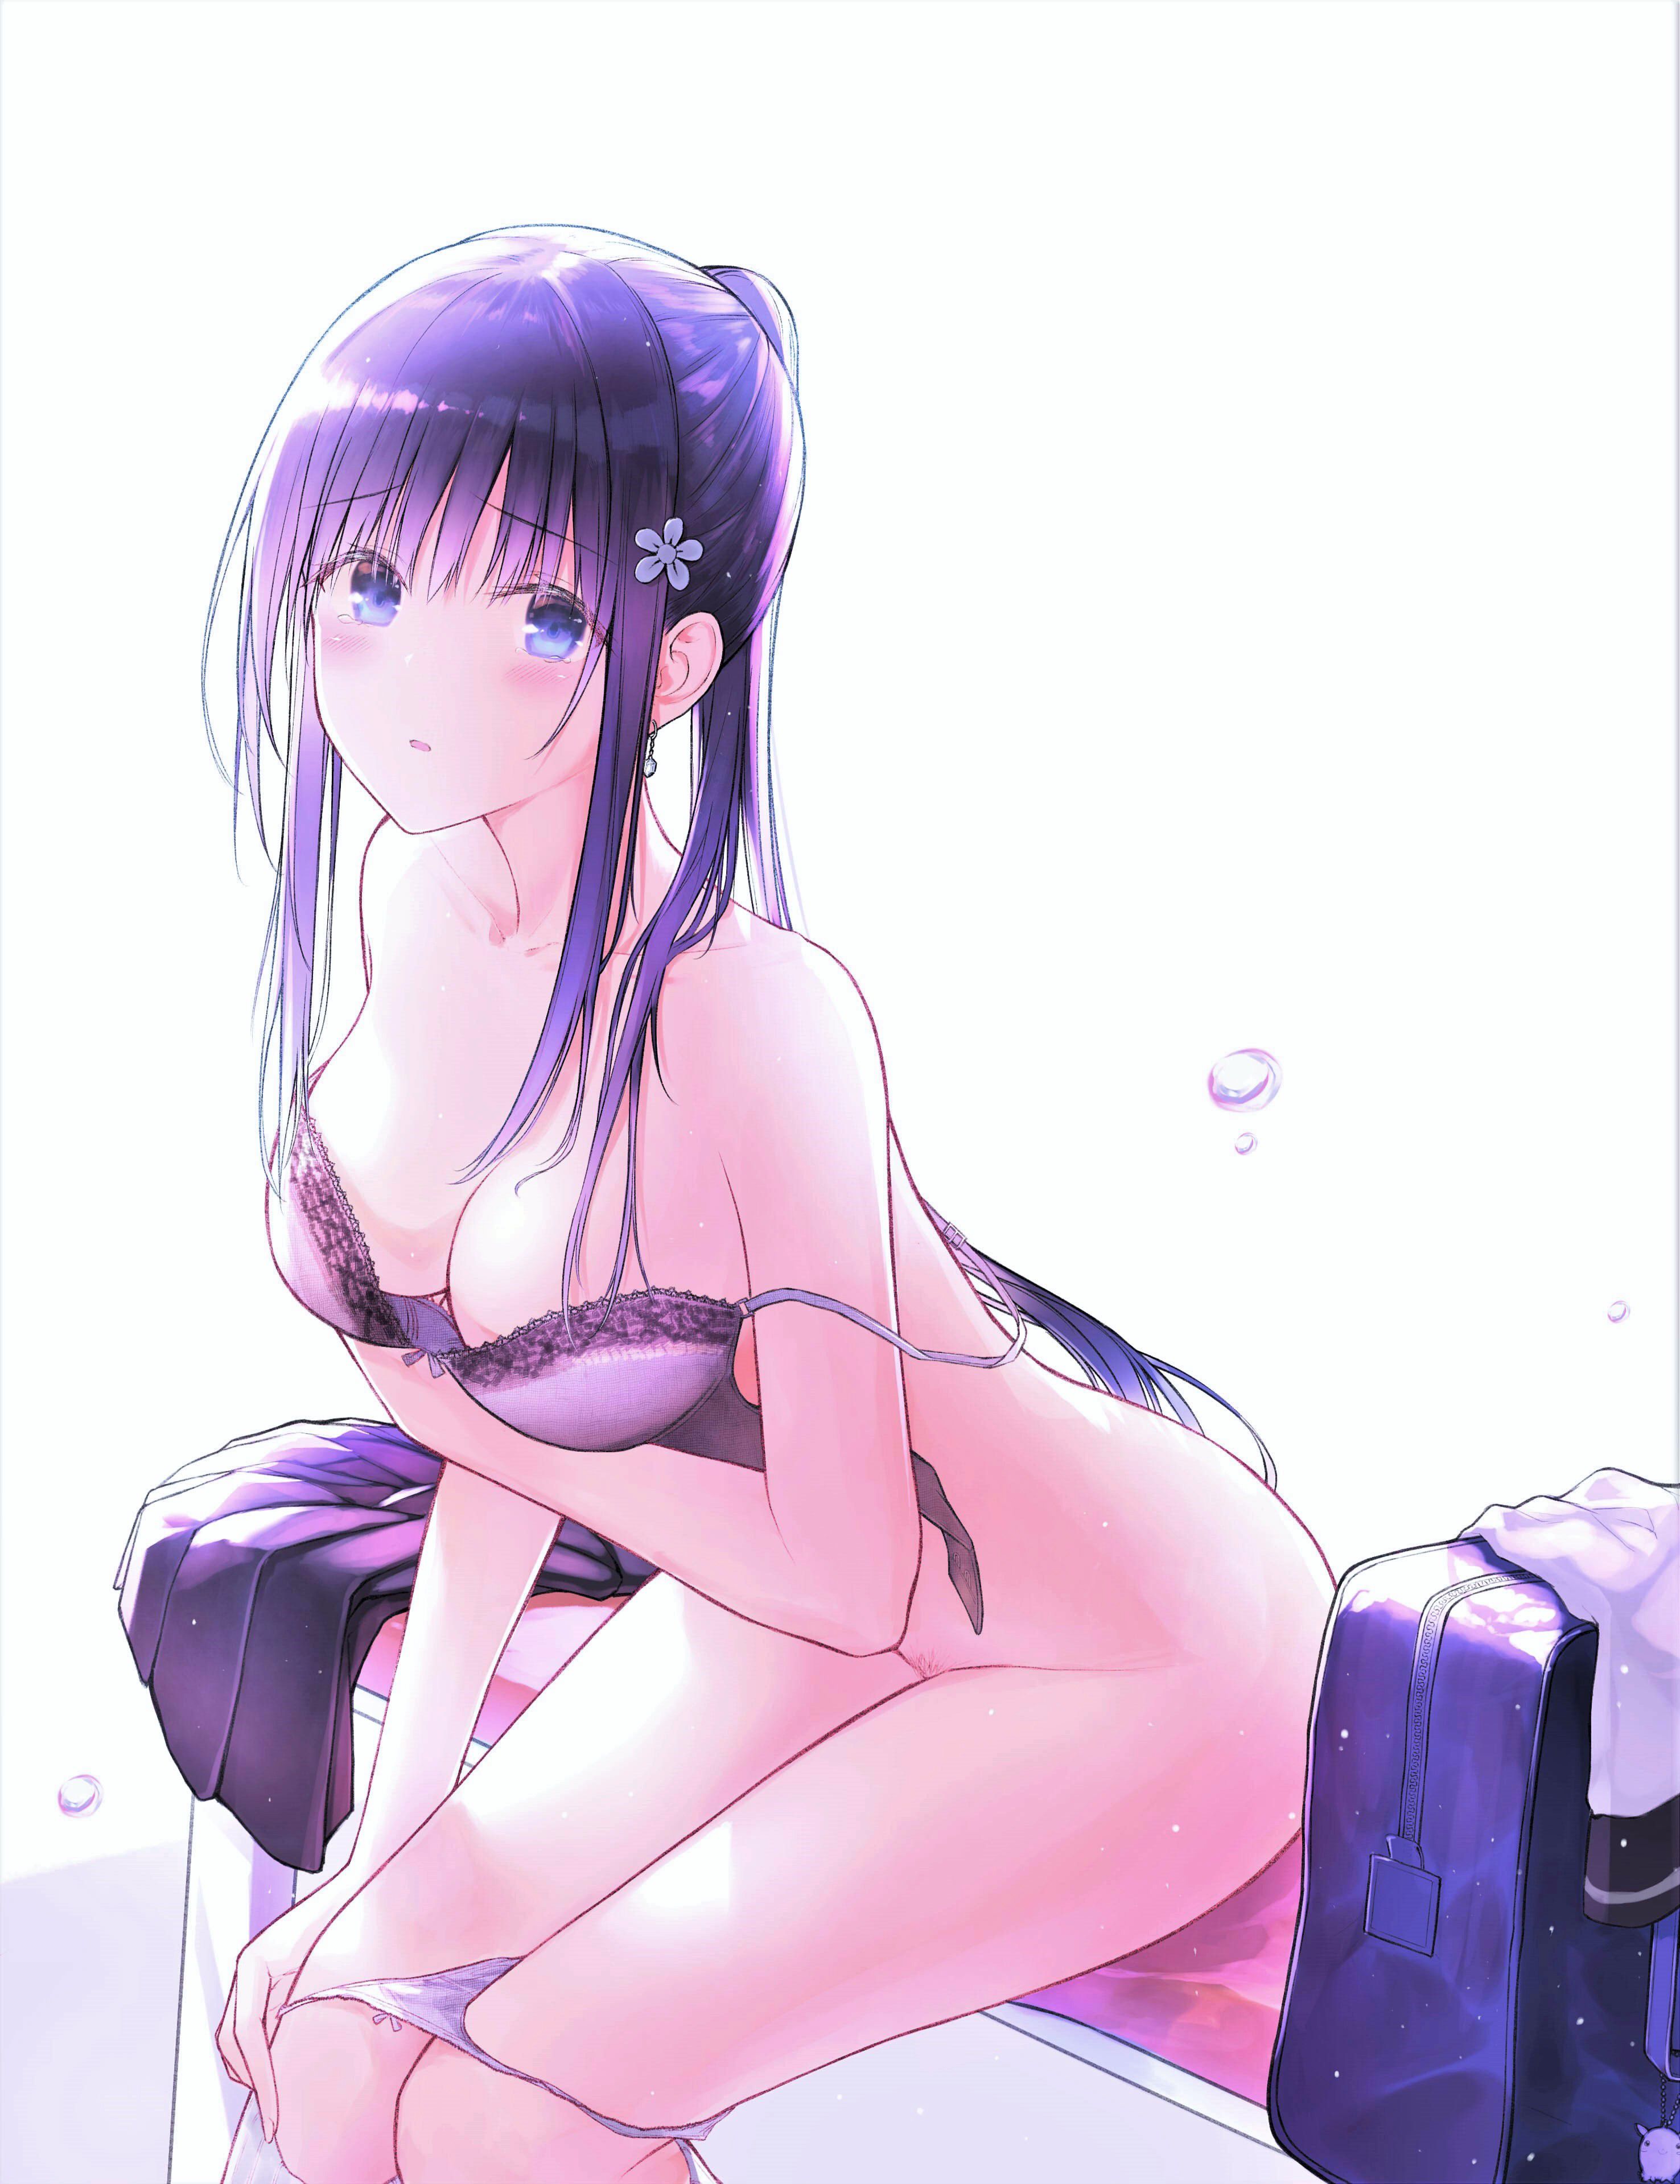 [Erotic anime summary] images collection of beautiful girls who are beautiful women with clothes taking off [50 sheets] 24